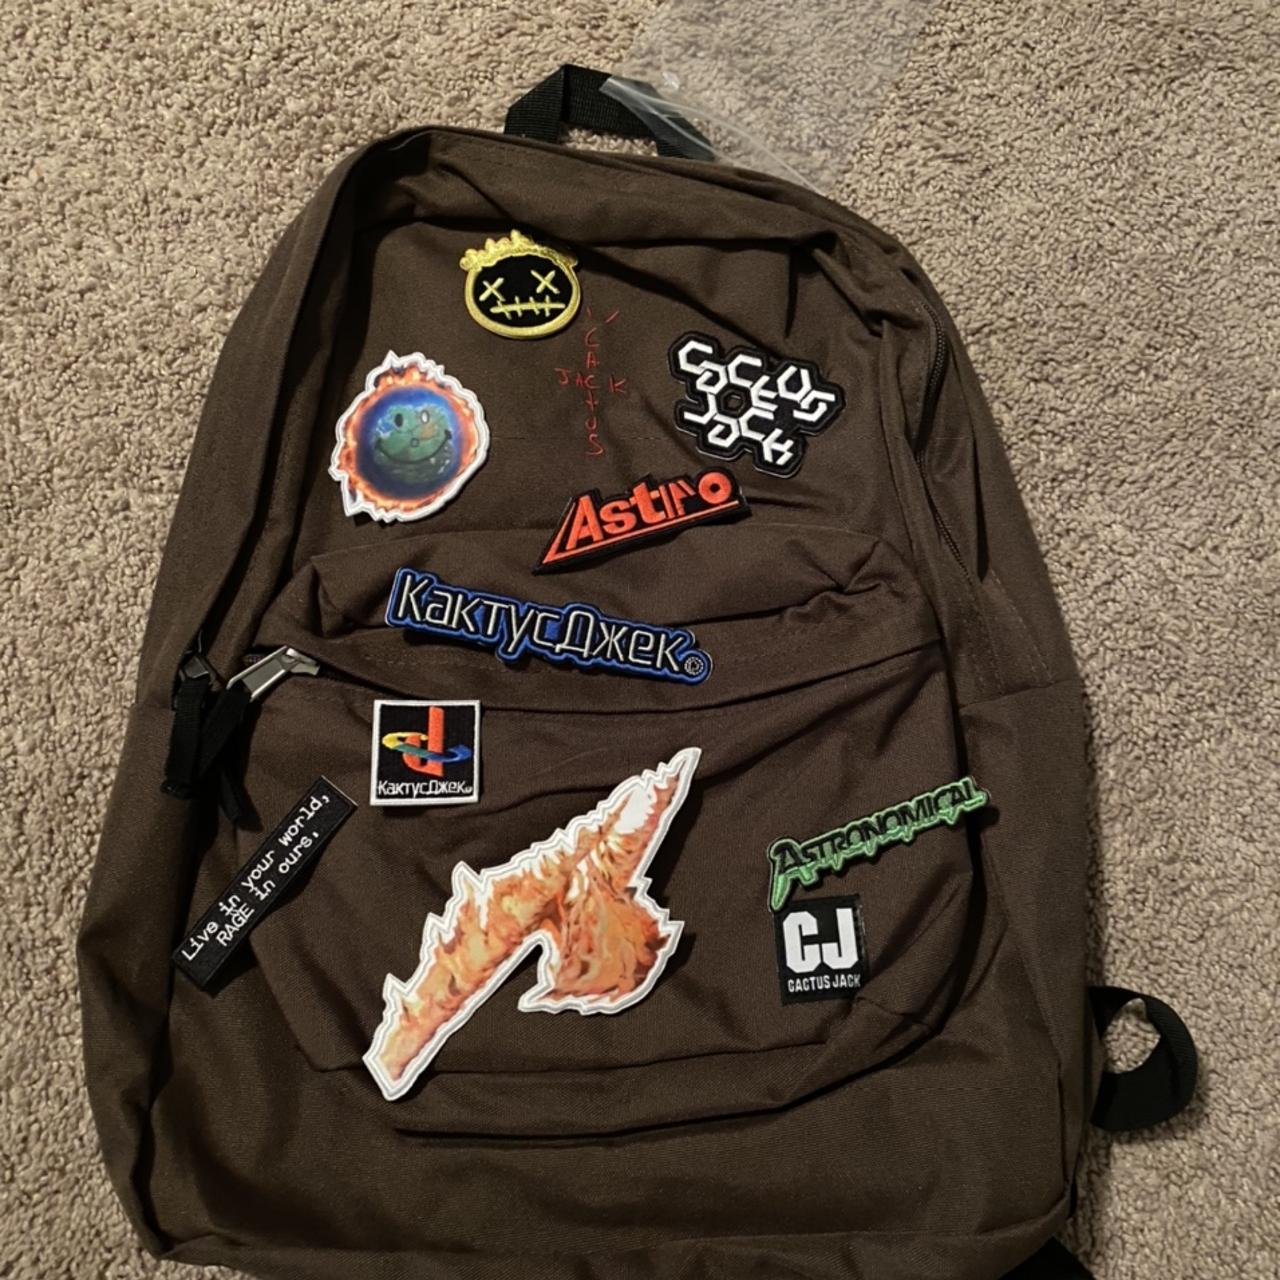 Travis Scott cactus jack backpack from the for ite...